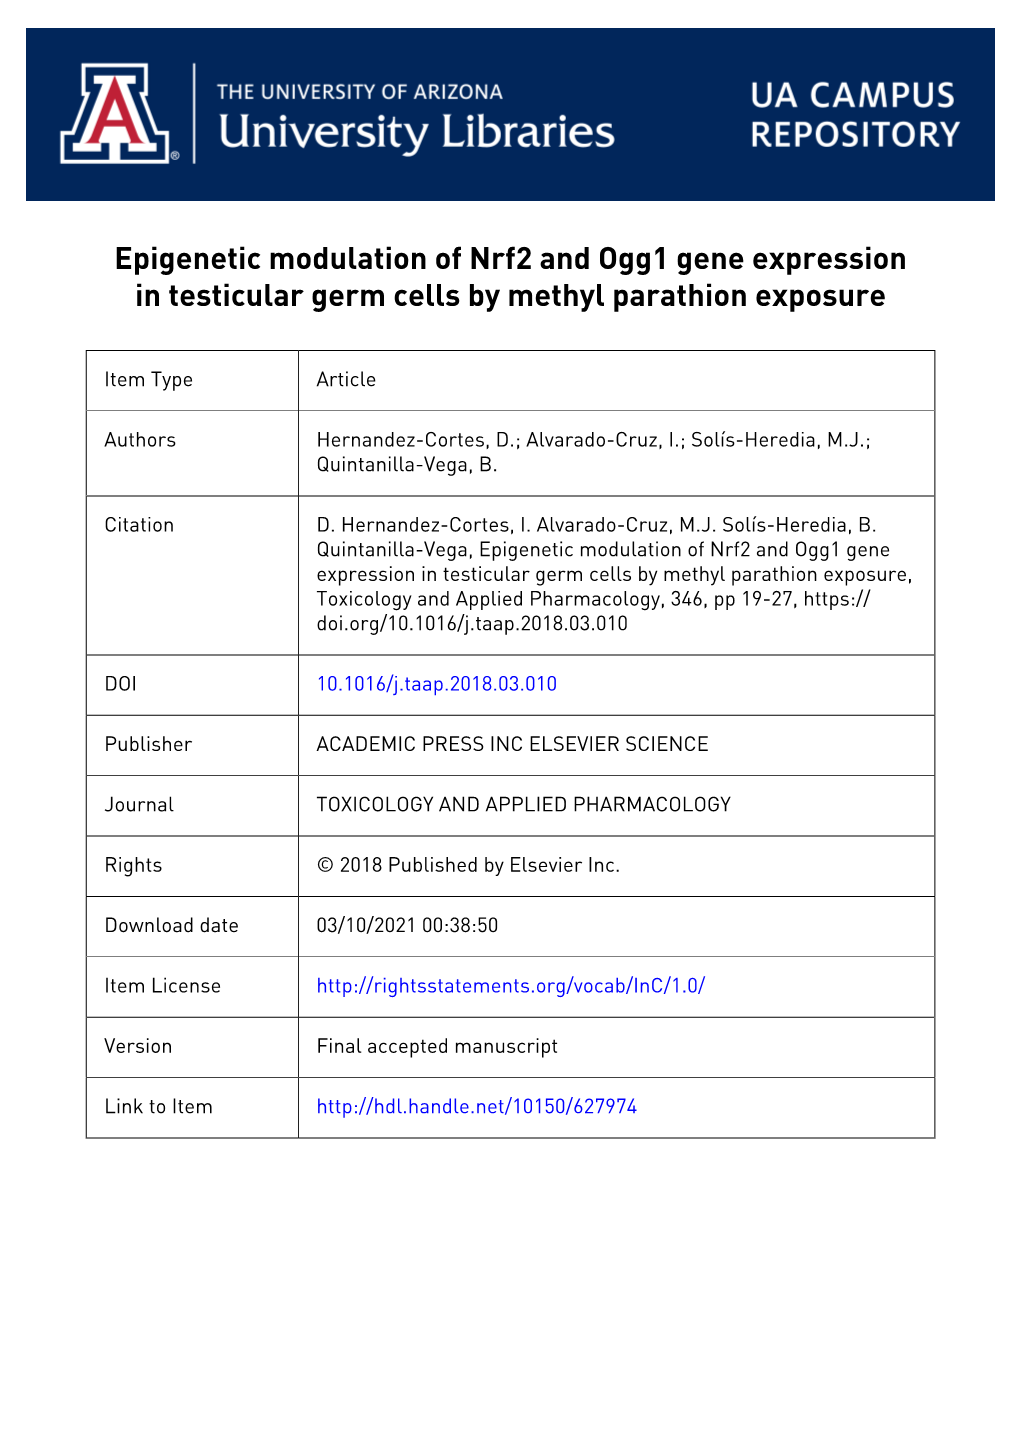 1 Epigenetic Modulation of Nrf2 and Ogg1 Gene Expression in Testicular